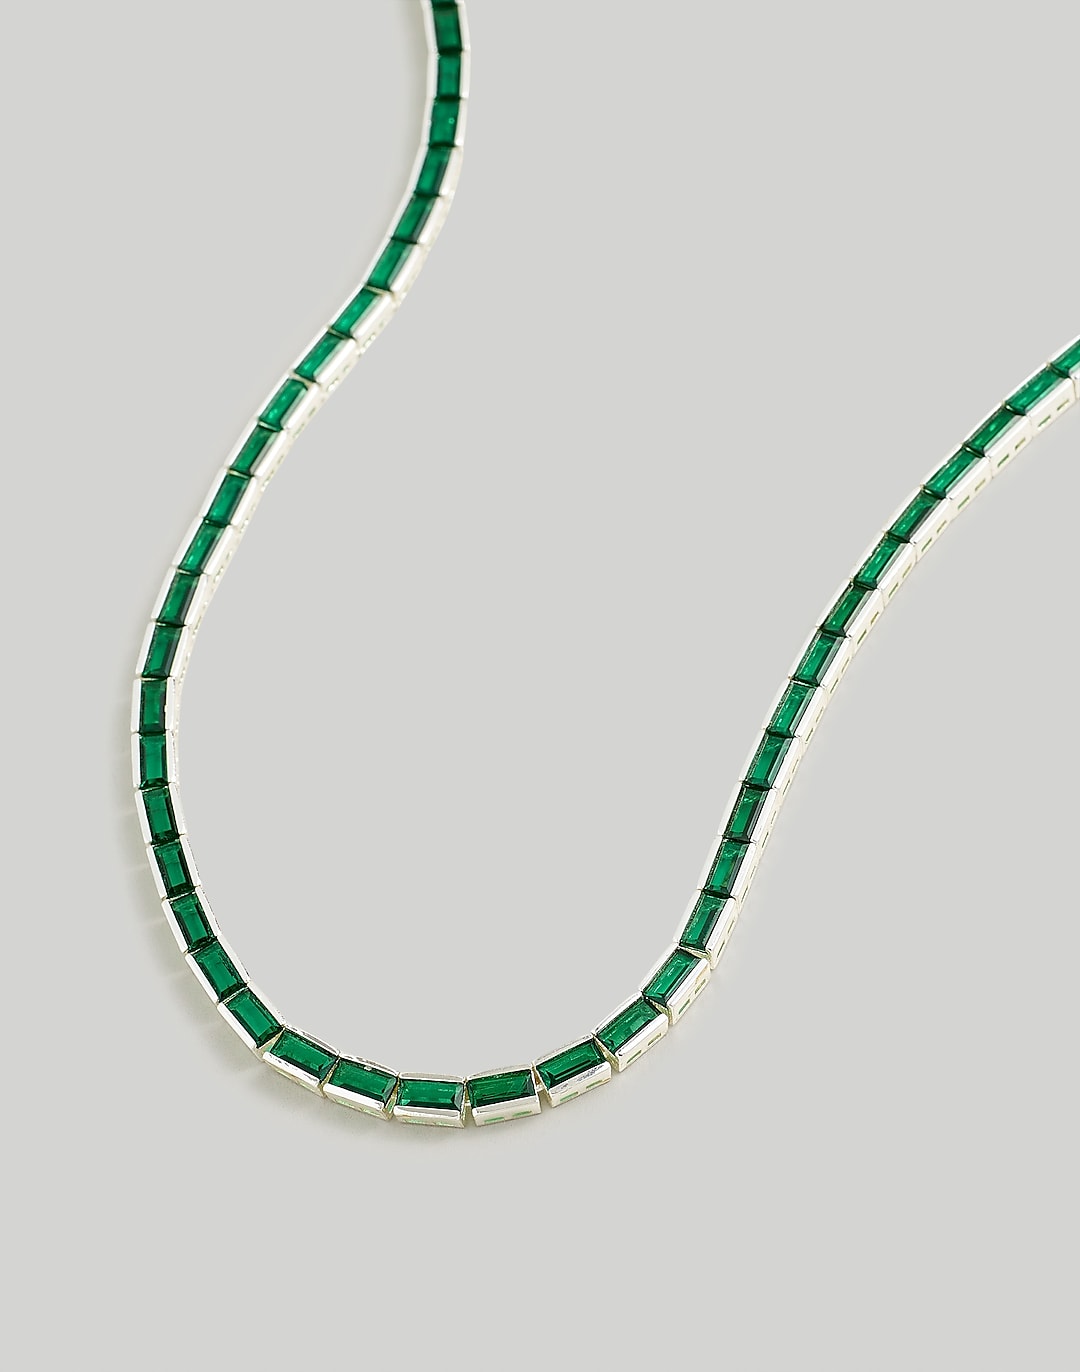 Madewell x Aimee Song Tennis Collection Baguette Crystal Choker Necklace | Madewell